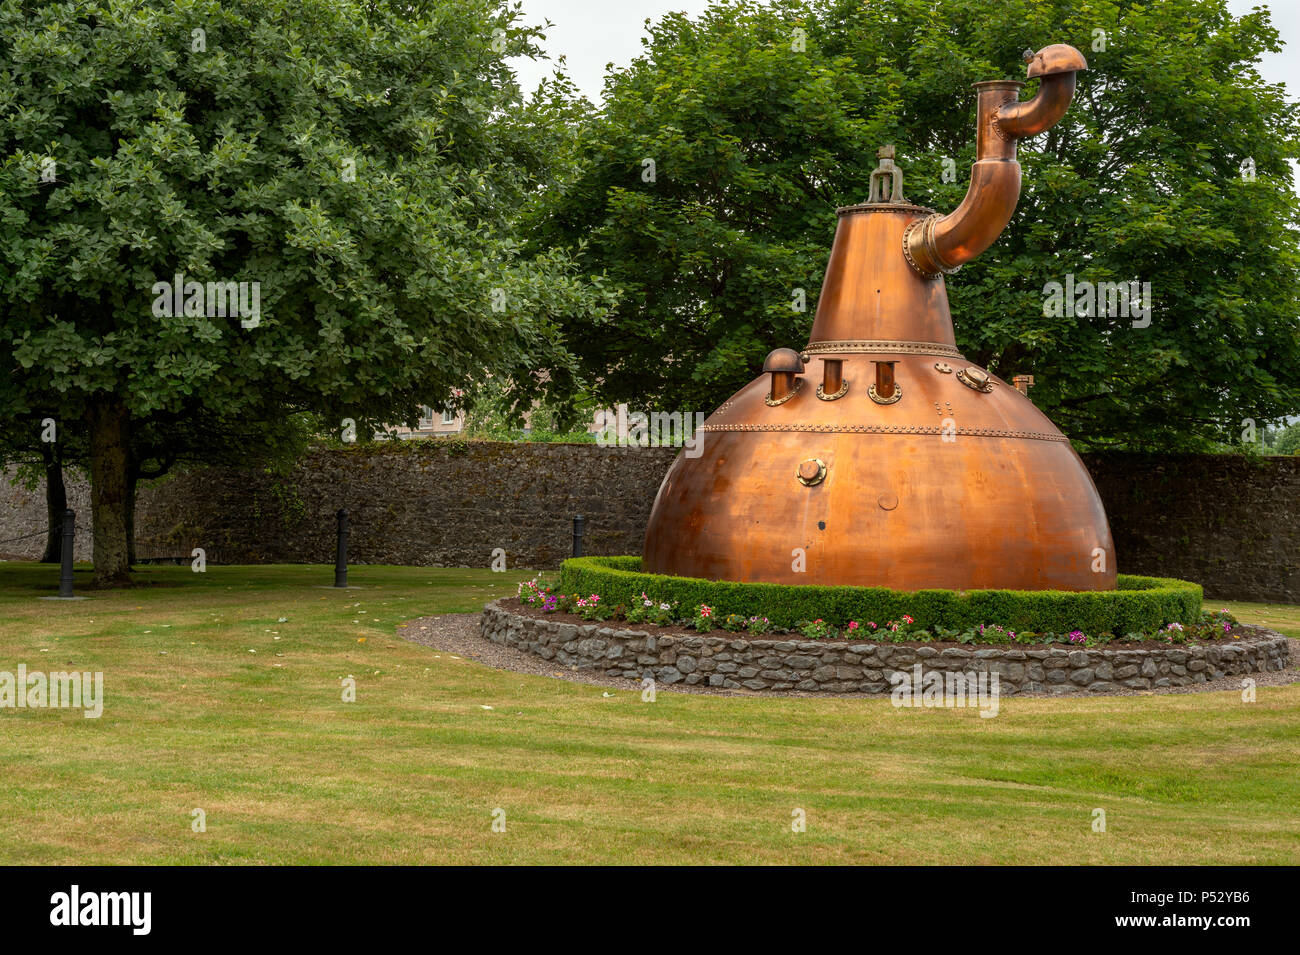 The emblematic Copper Still Pot at the entrance of the Old Jameson Whiskey Distillery in Midleton, County Cork, Ireland. The Jameson Experience tour. Stock Photo